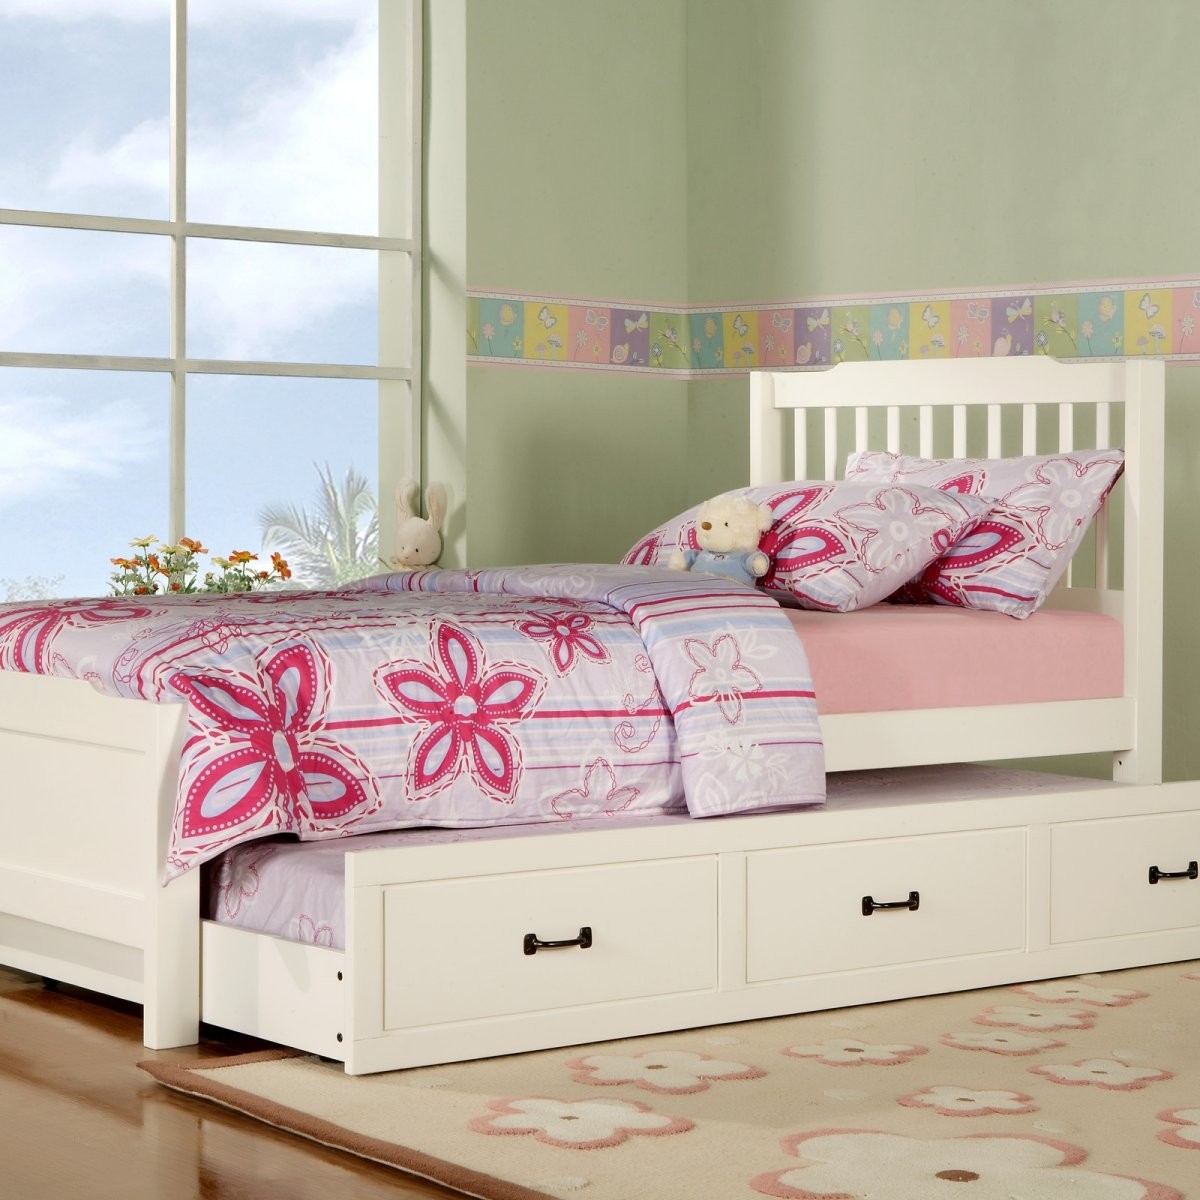 Trundle beds for children homesfeed